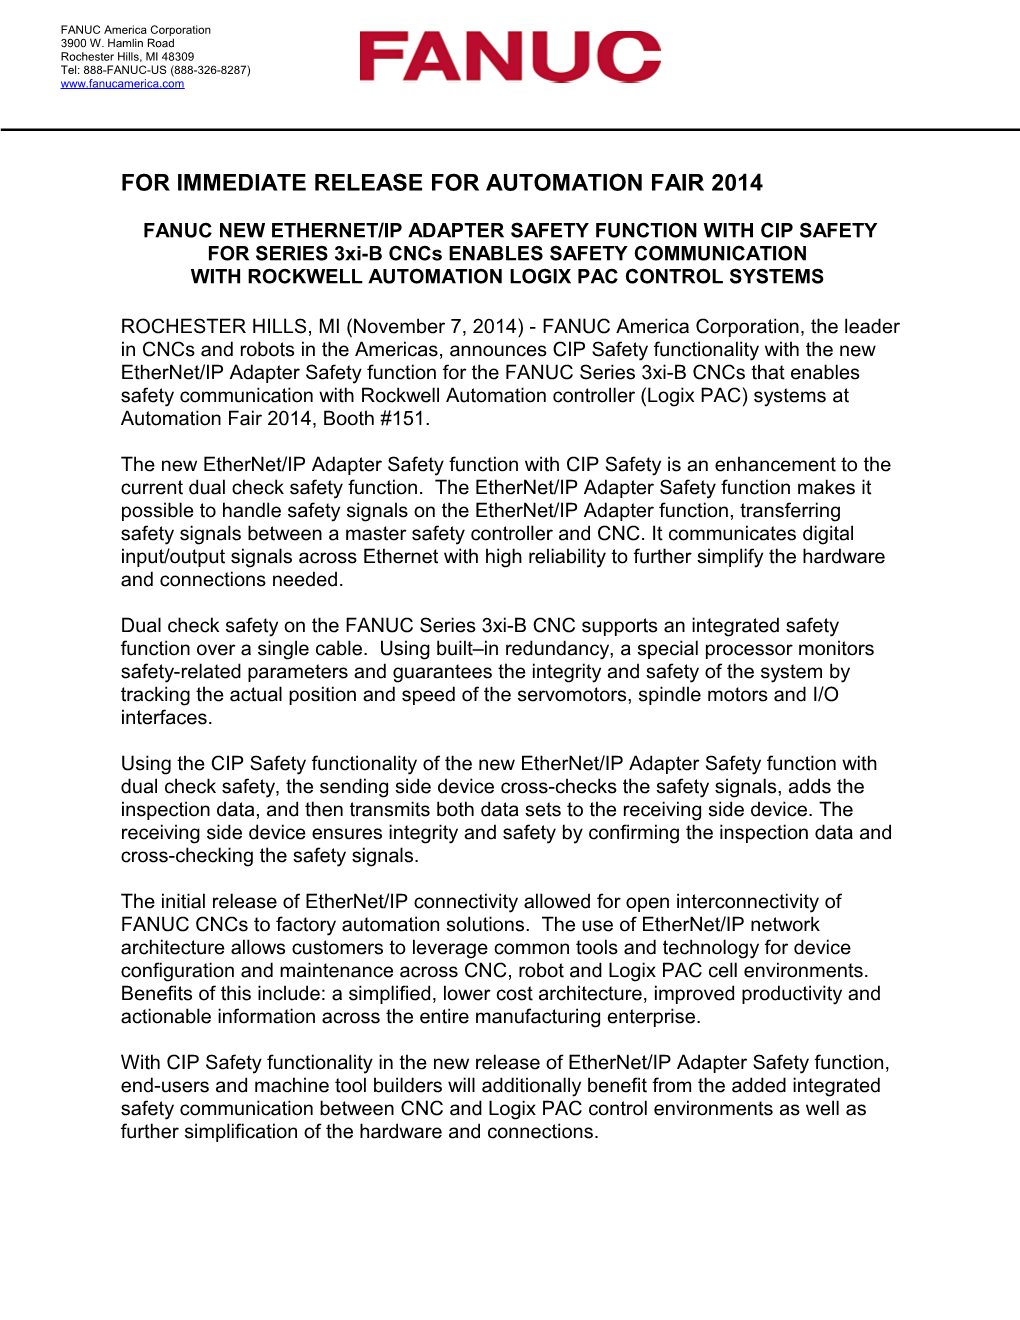 For Immediate Release for Automation Fair 2014